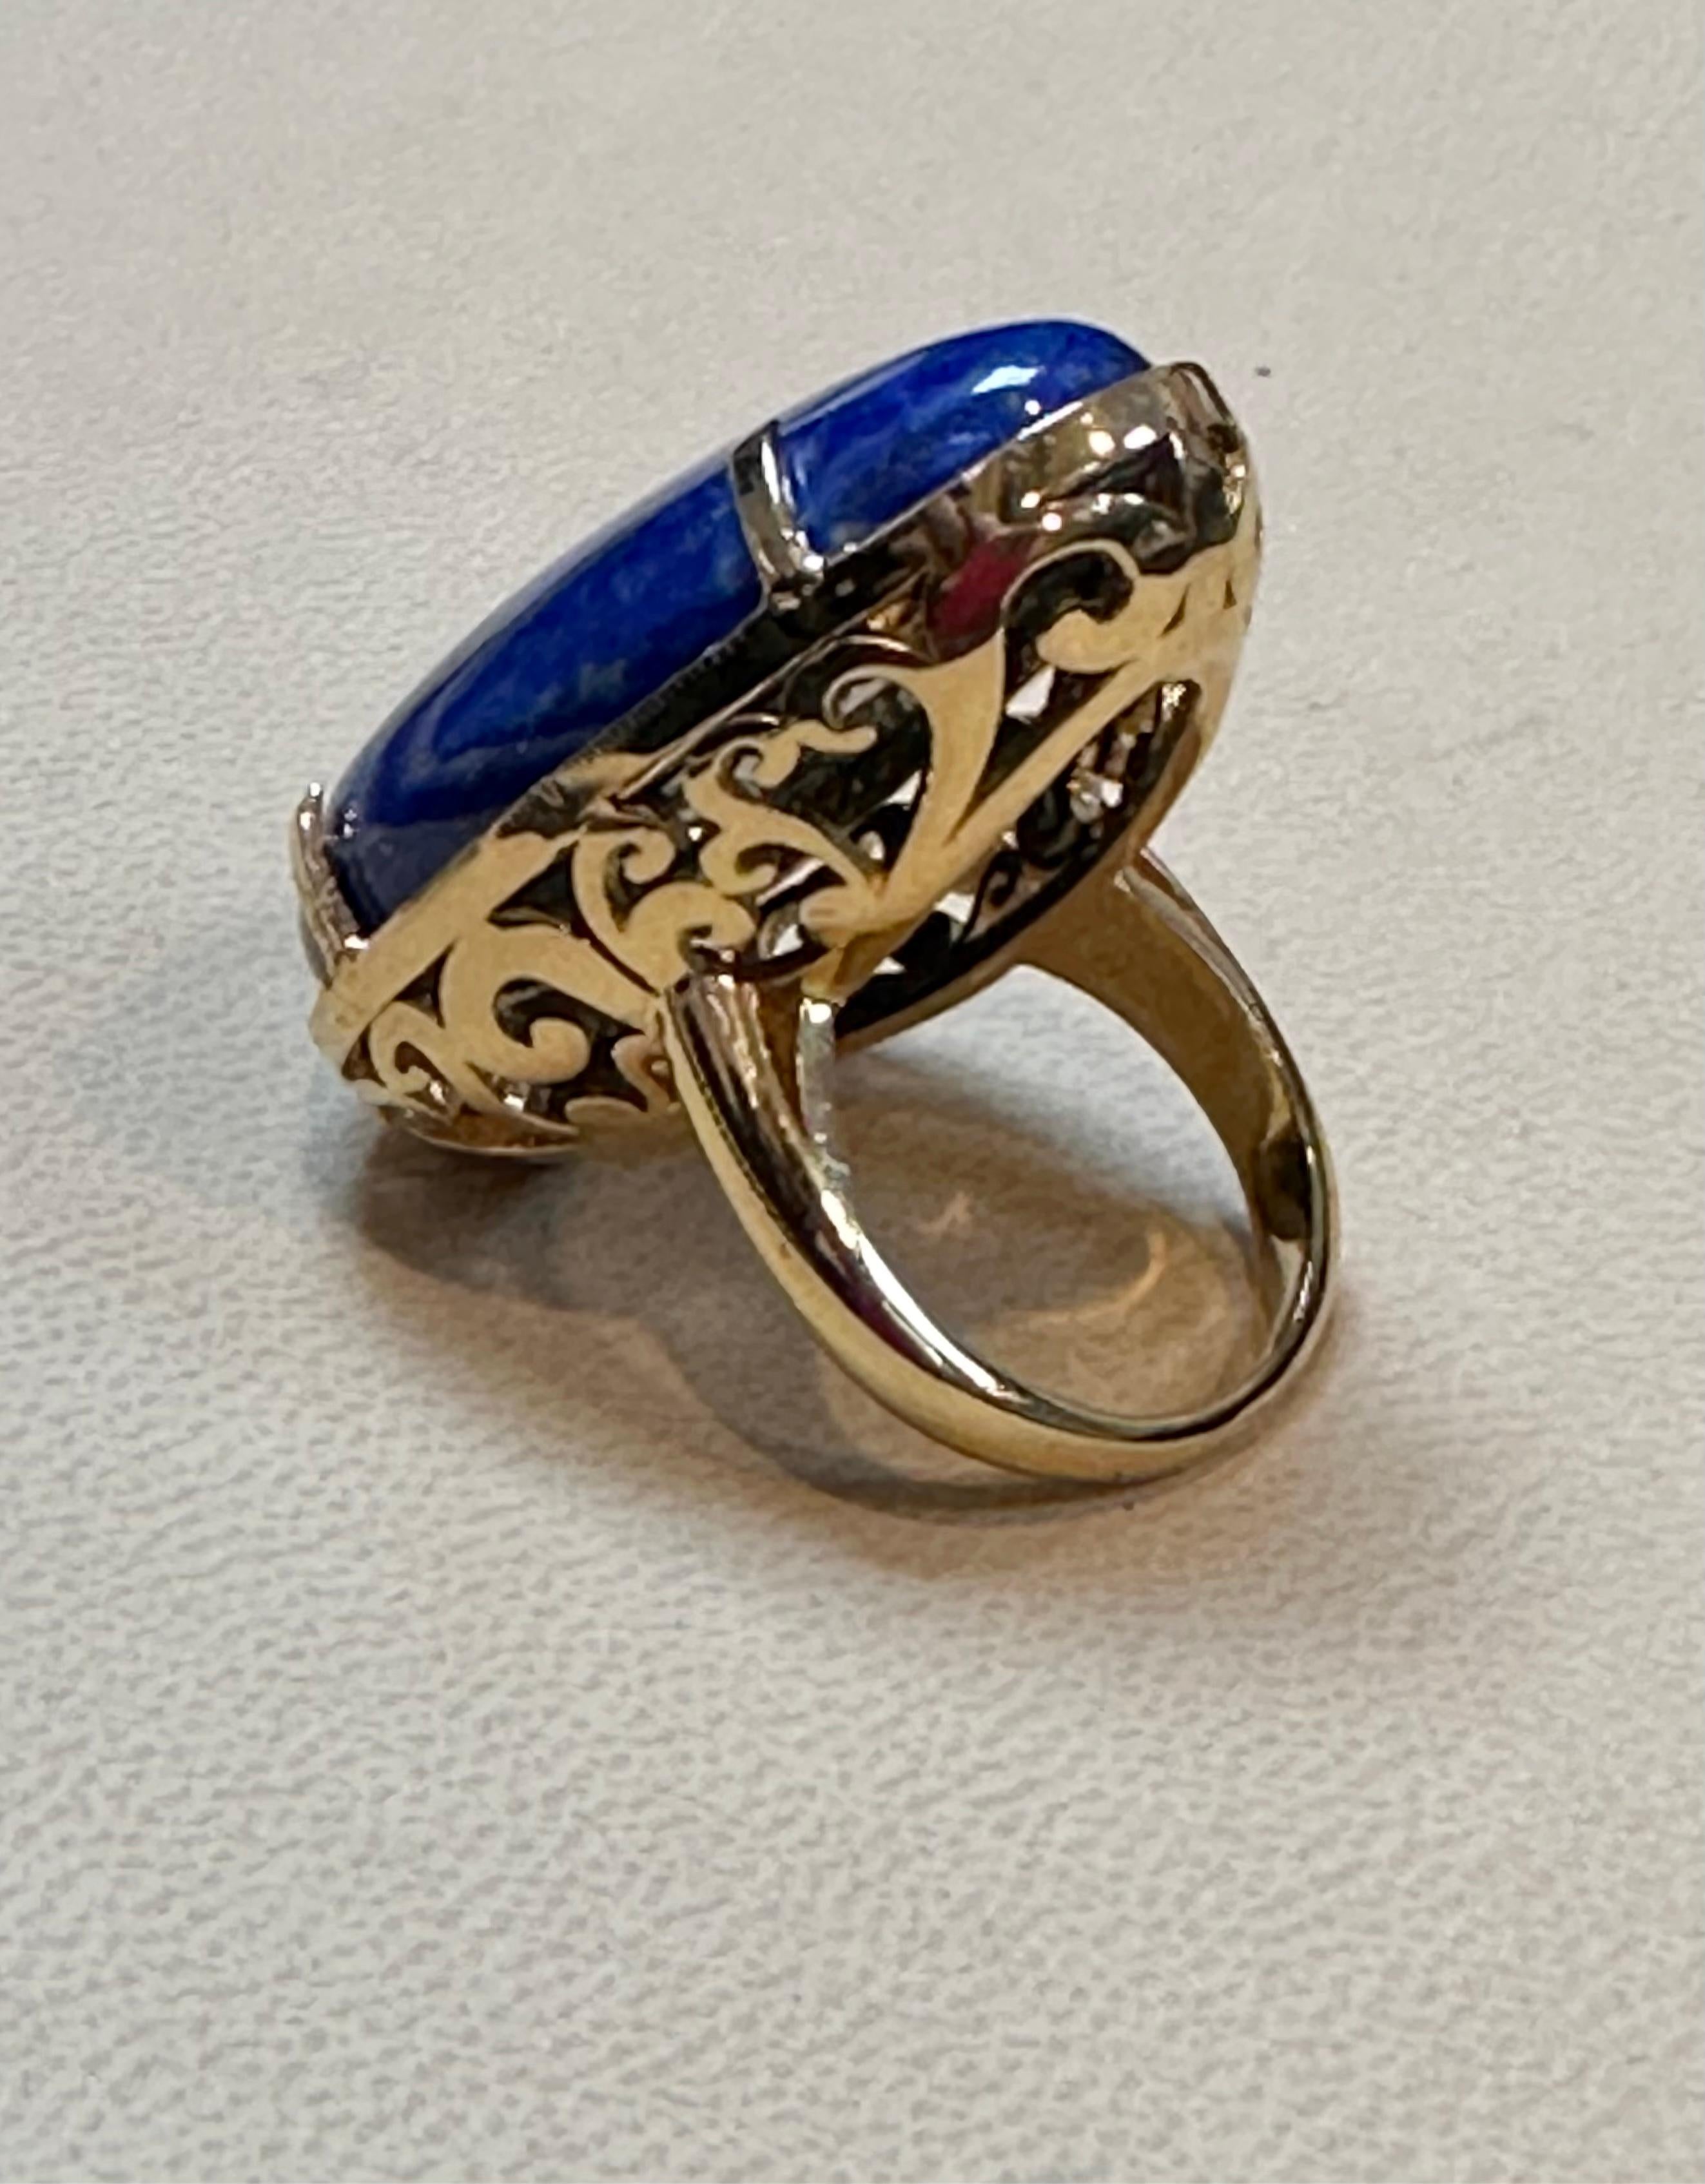 Huge 63 Ct Natural Cabochon Lapis Lazuli Ring in 14 Kt Yellow Gold, Estate In Excellent Condition For Sale In New York, NY